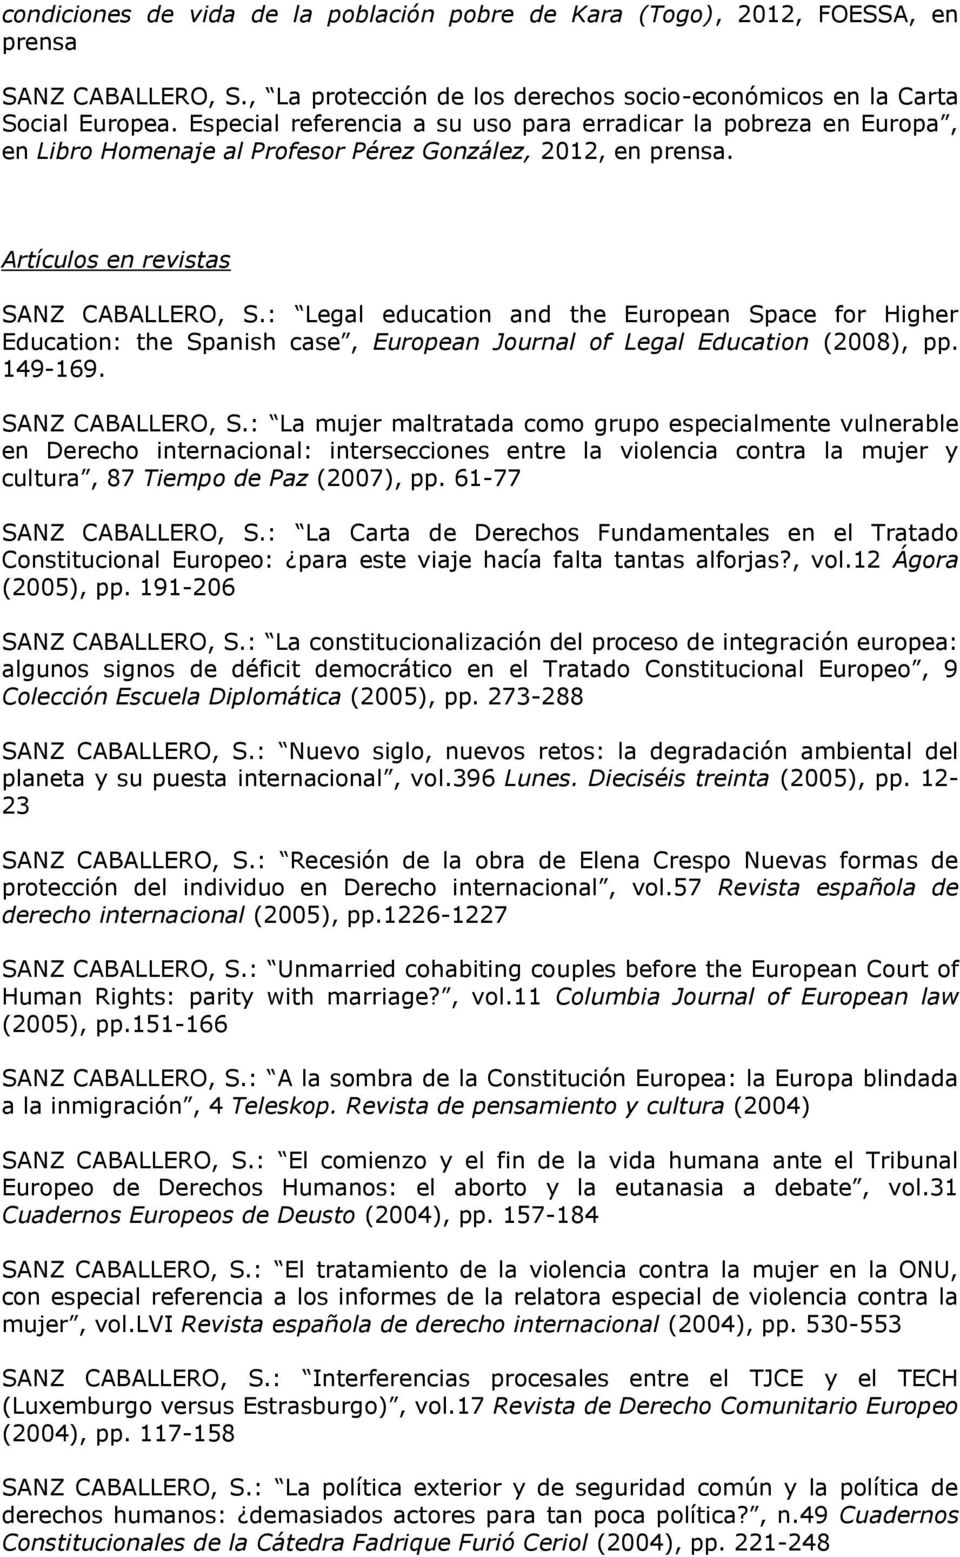 : Legal education and the European Space for Higher Education: the Spanish case, European Journal of Legal Education (2008), pp. 149-169. SANZ CABALLERO, S.